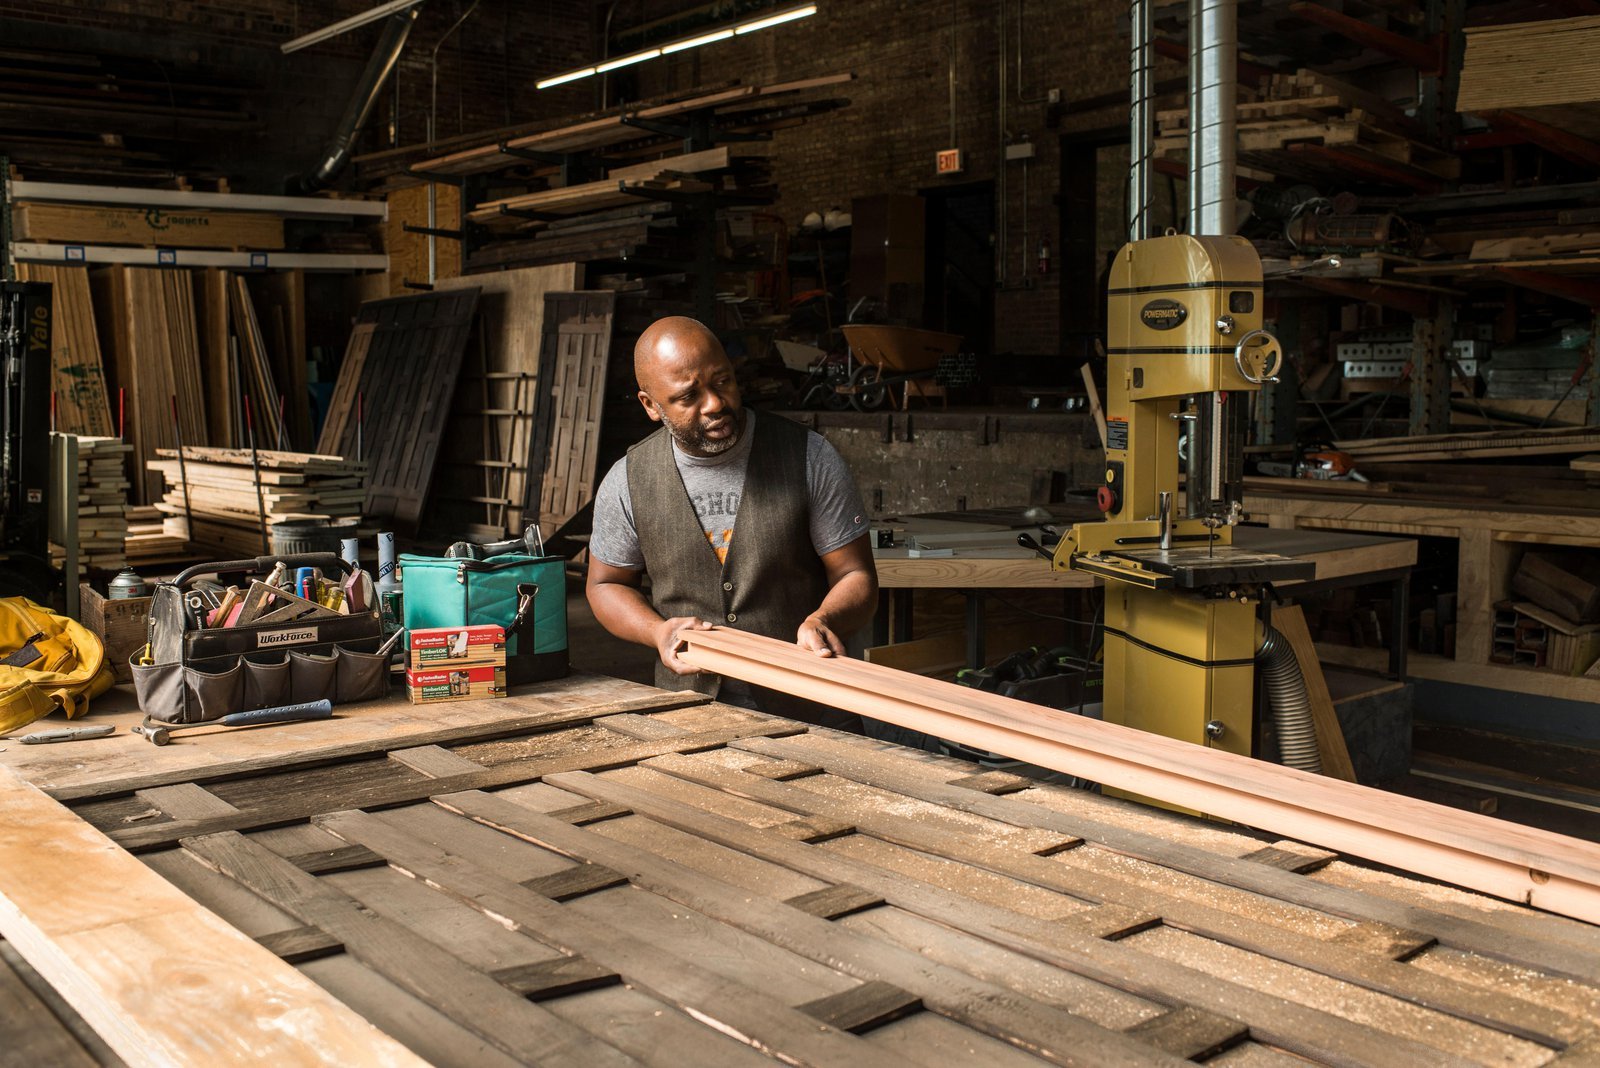 How Theaster Gates Is Revitalizing Chicago's South Side, One Vacant Building at a Time